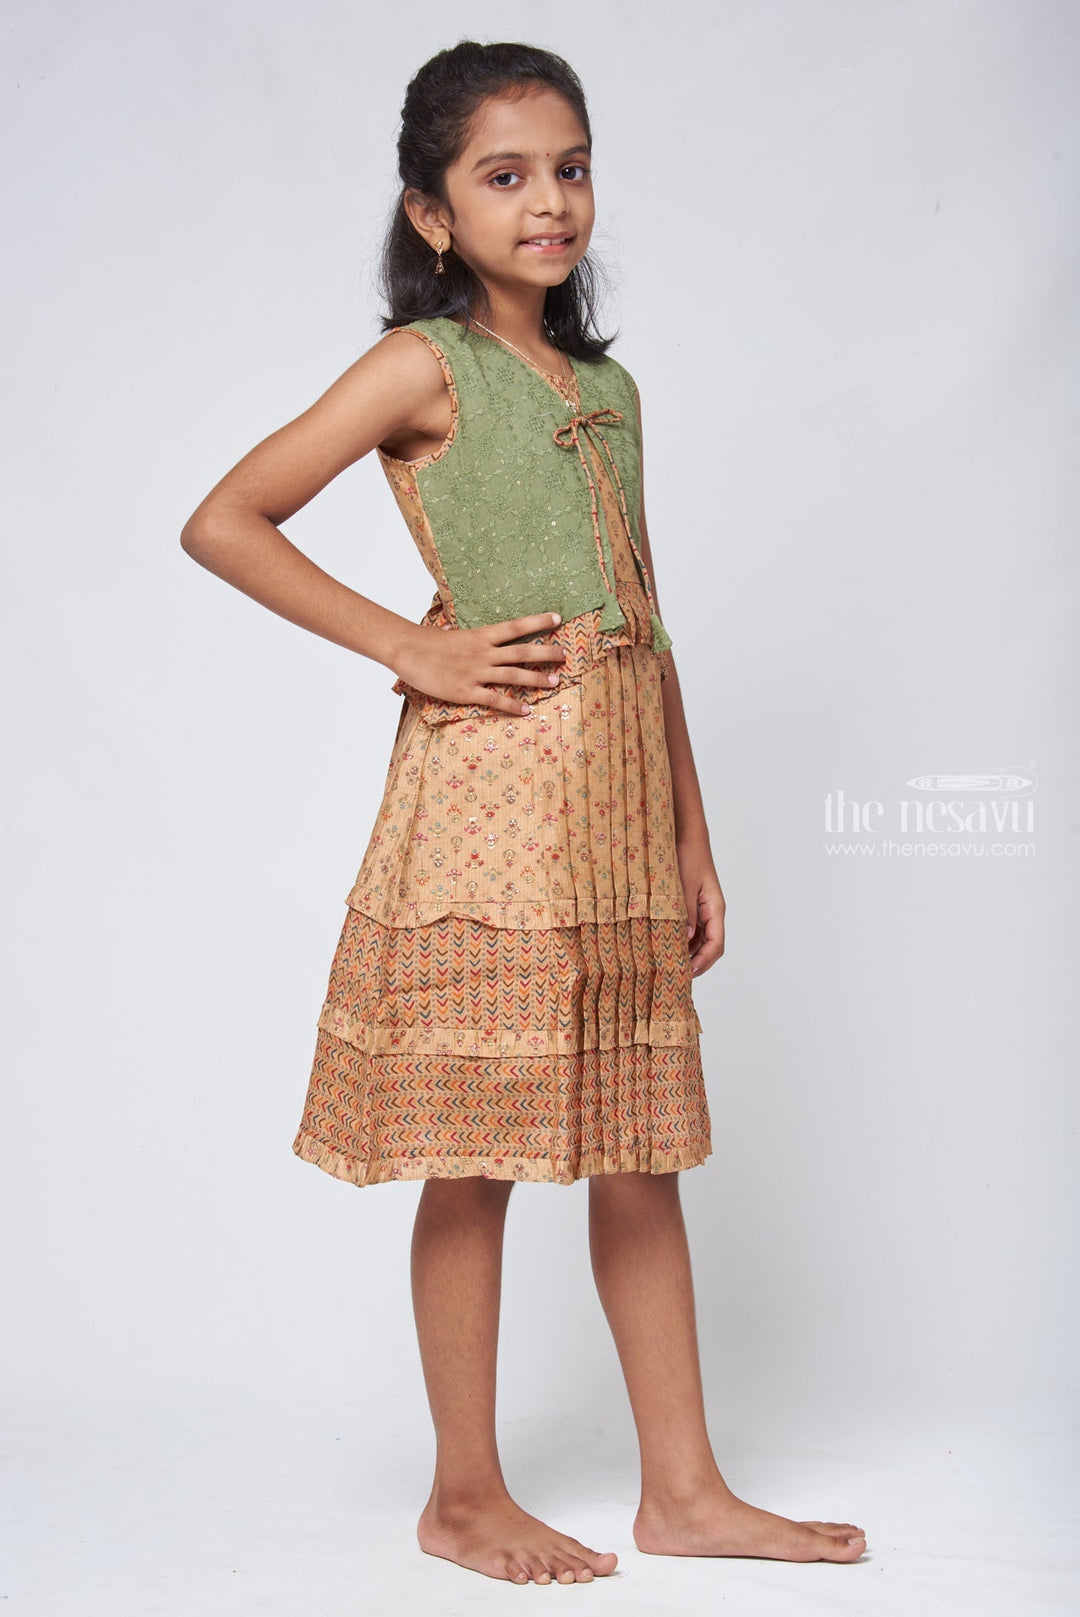 The Nesavu Girls Cotton Frock Beige Geometrical Pleated Cotton Frock with Green Overcoat - Designer Girls Attire Nesavu Cotton Frock Gown | Simple Cotton Frocks Designs | The Nesavu